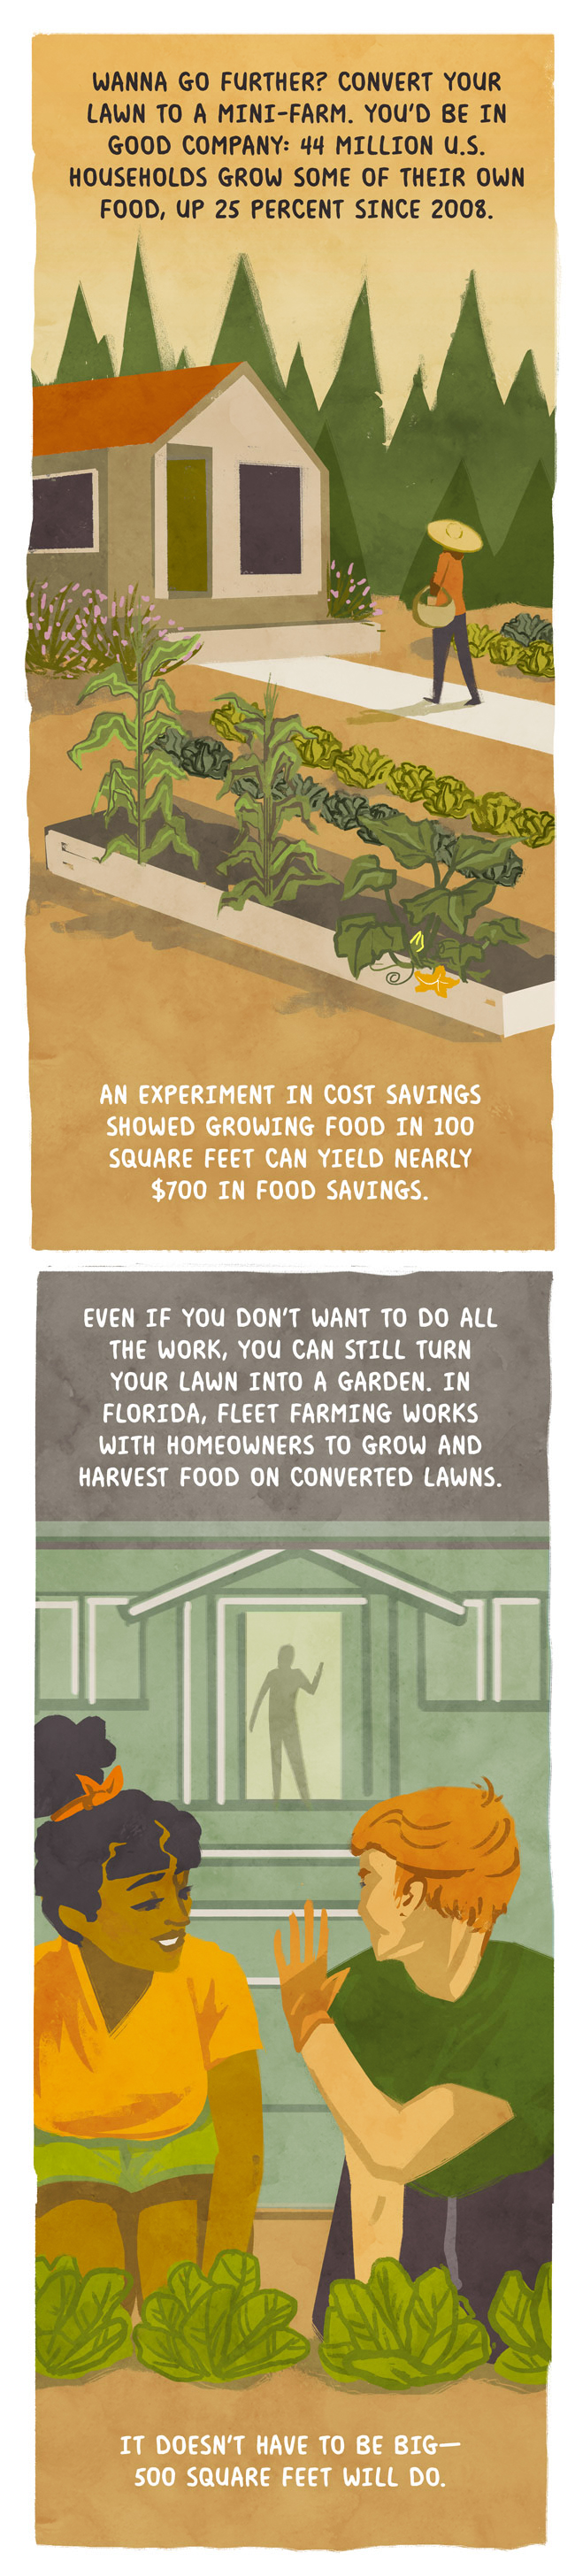 44 million US households grow some of their own food.